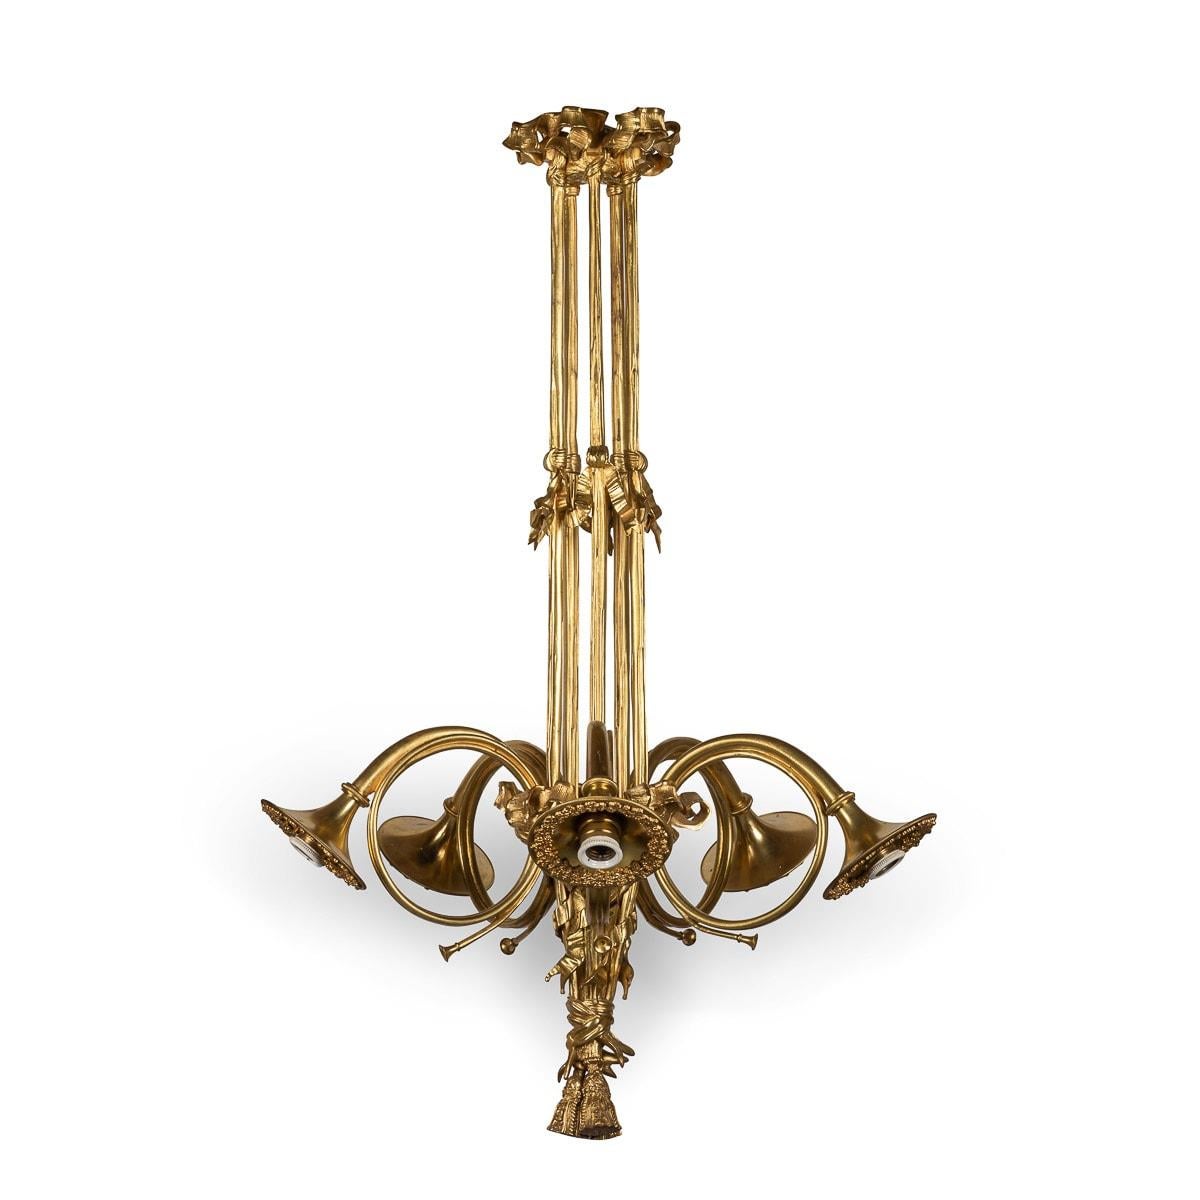 Antique 19th Century French Empire style ormolu bronze chandelier fitted with an allegory of trumpets. The item has been converted to accommodate modern day lightbulbs. 

CONDITION
Wear consistent with age, please see attached photographs for